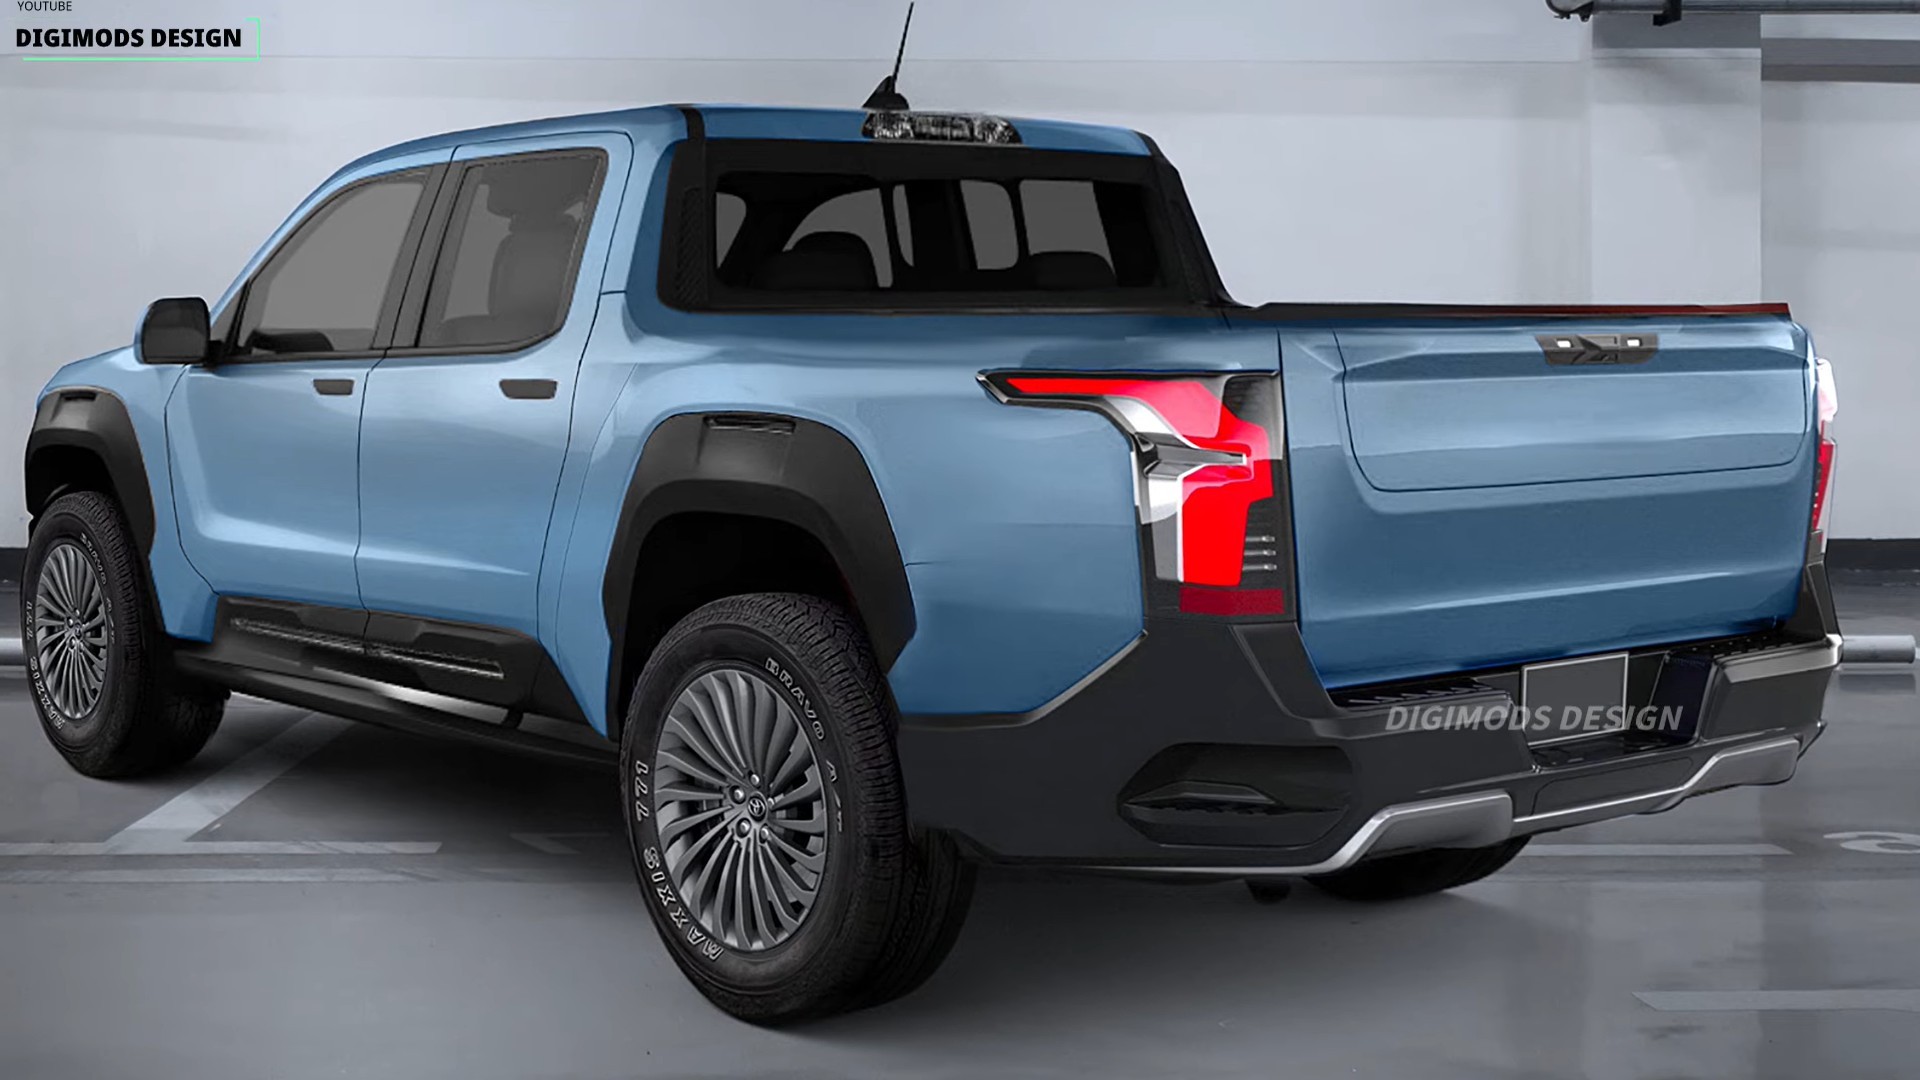 2025 Toyota Stout Revival: Everything We Know So Far